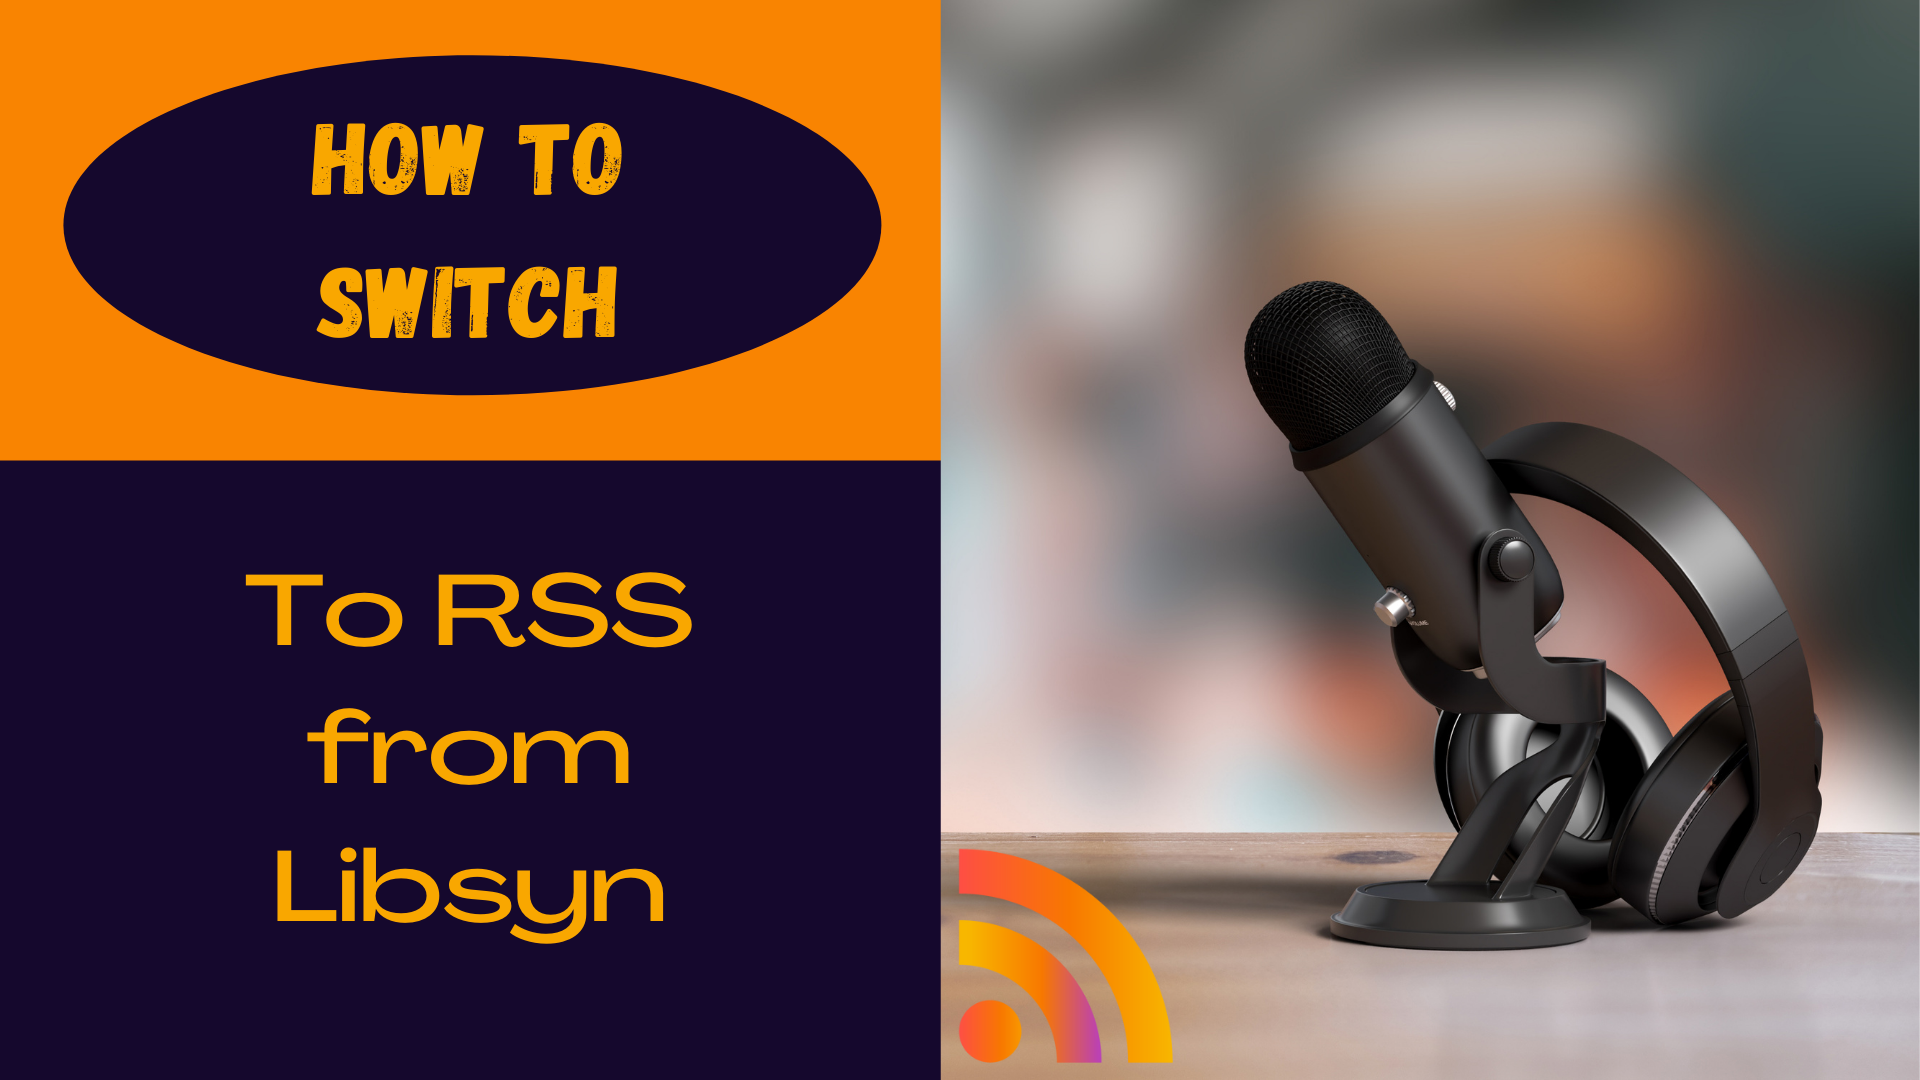 How to Switch to RSS from Libsyn